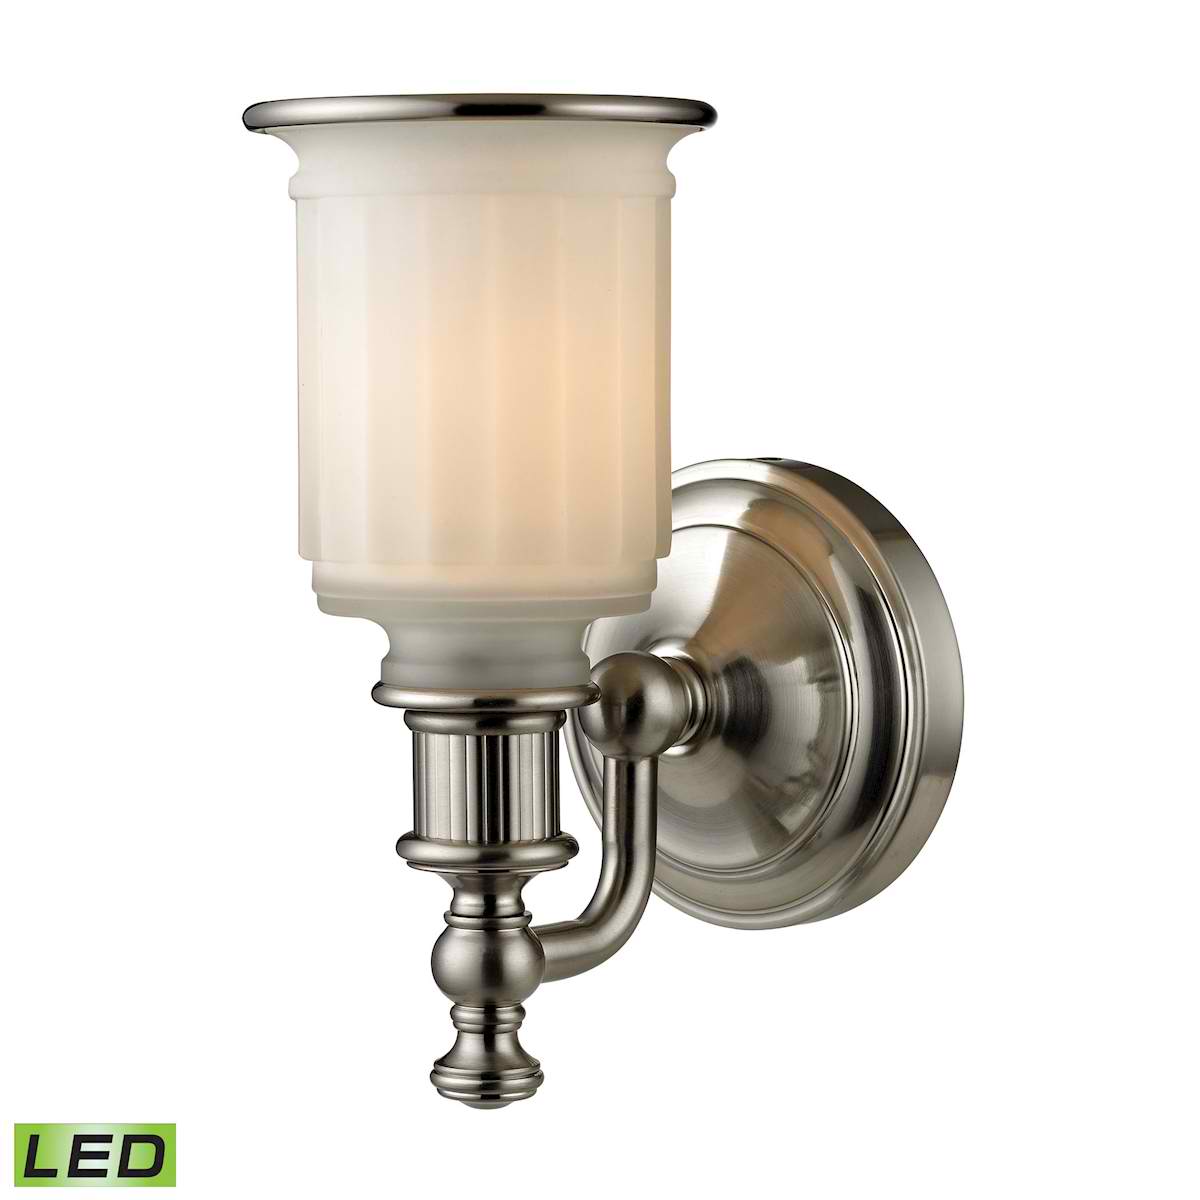 Acadia Collection 1 Light Bath in Brushed Nickel - LED Offering Up To 800 Lumens (60 Watt Equivalent)